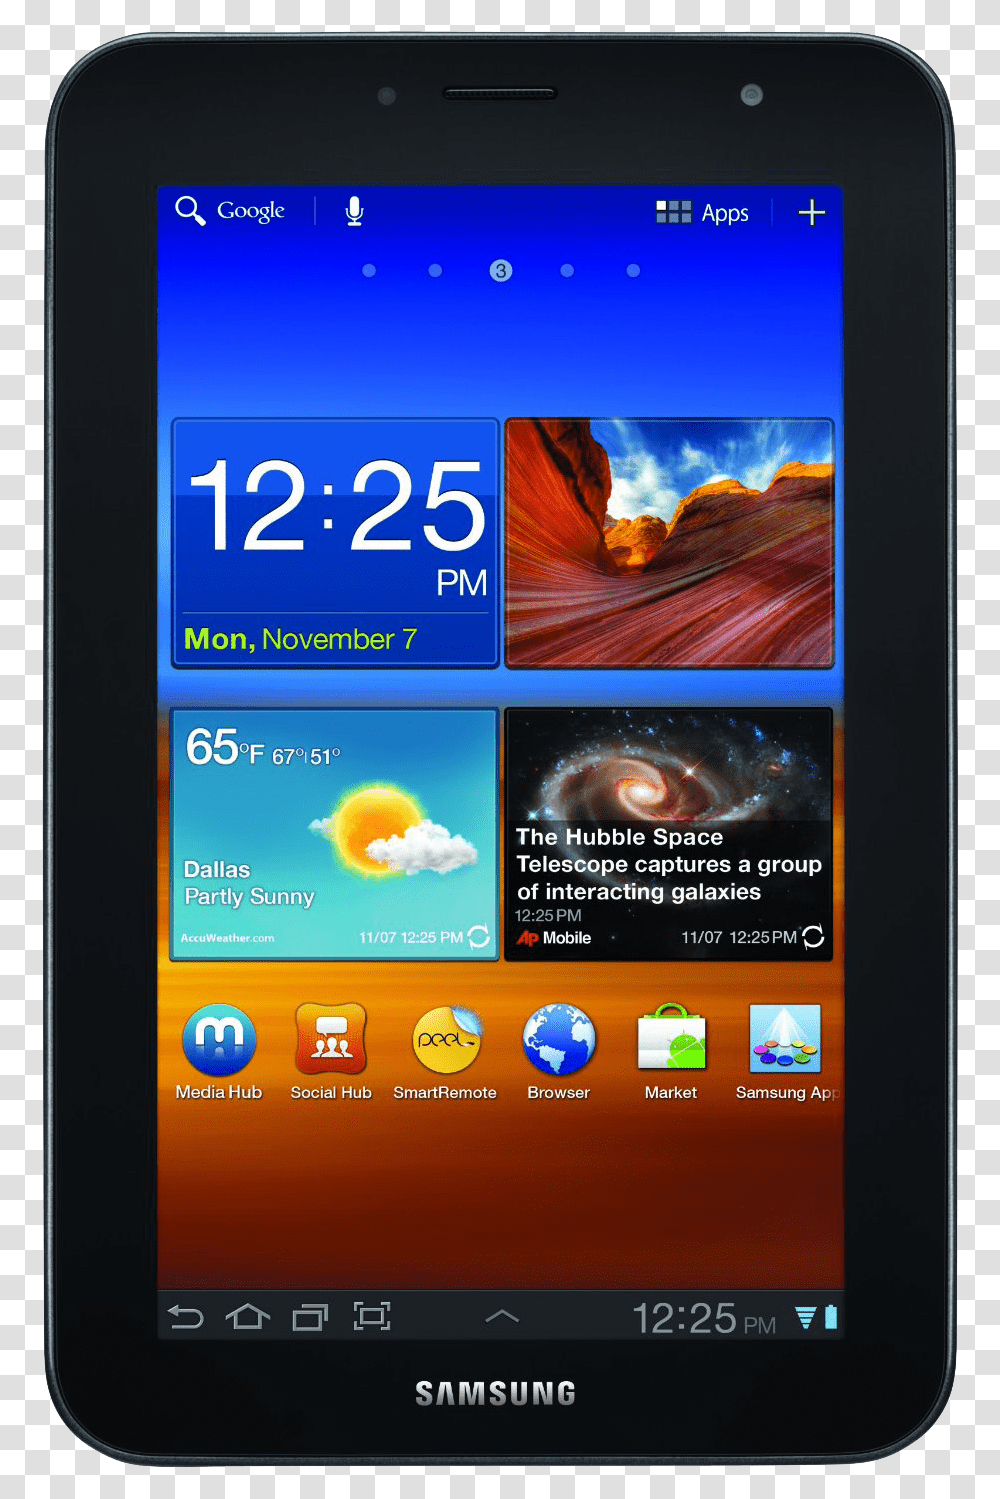 Samsung P6200 Galaxy Tab 7.0 Plus, Computer, Electronics, Tablet Computer, Mobile Phone Transparent Png